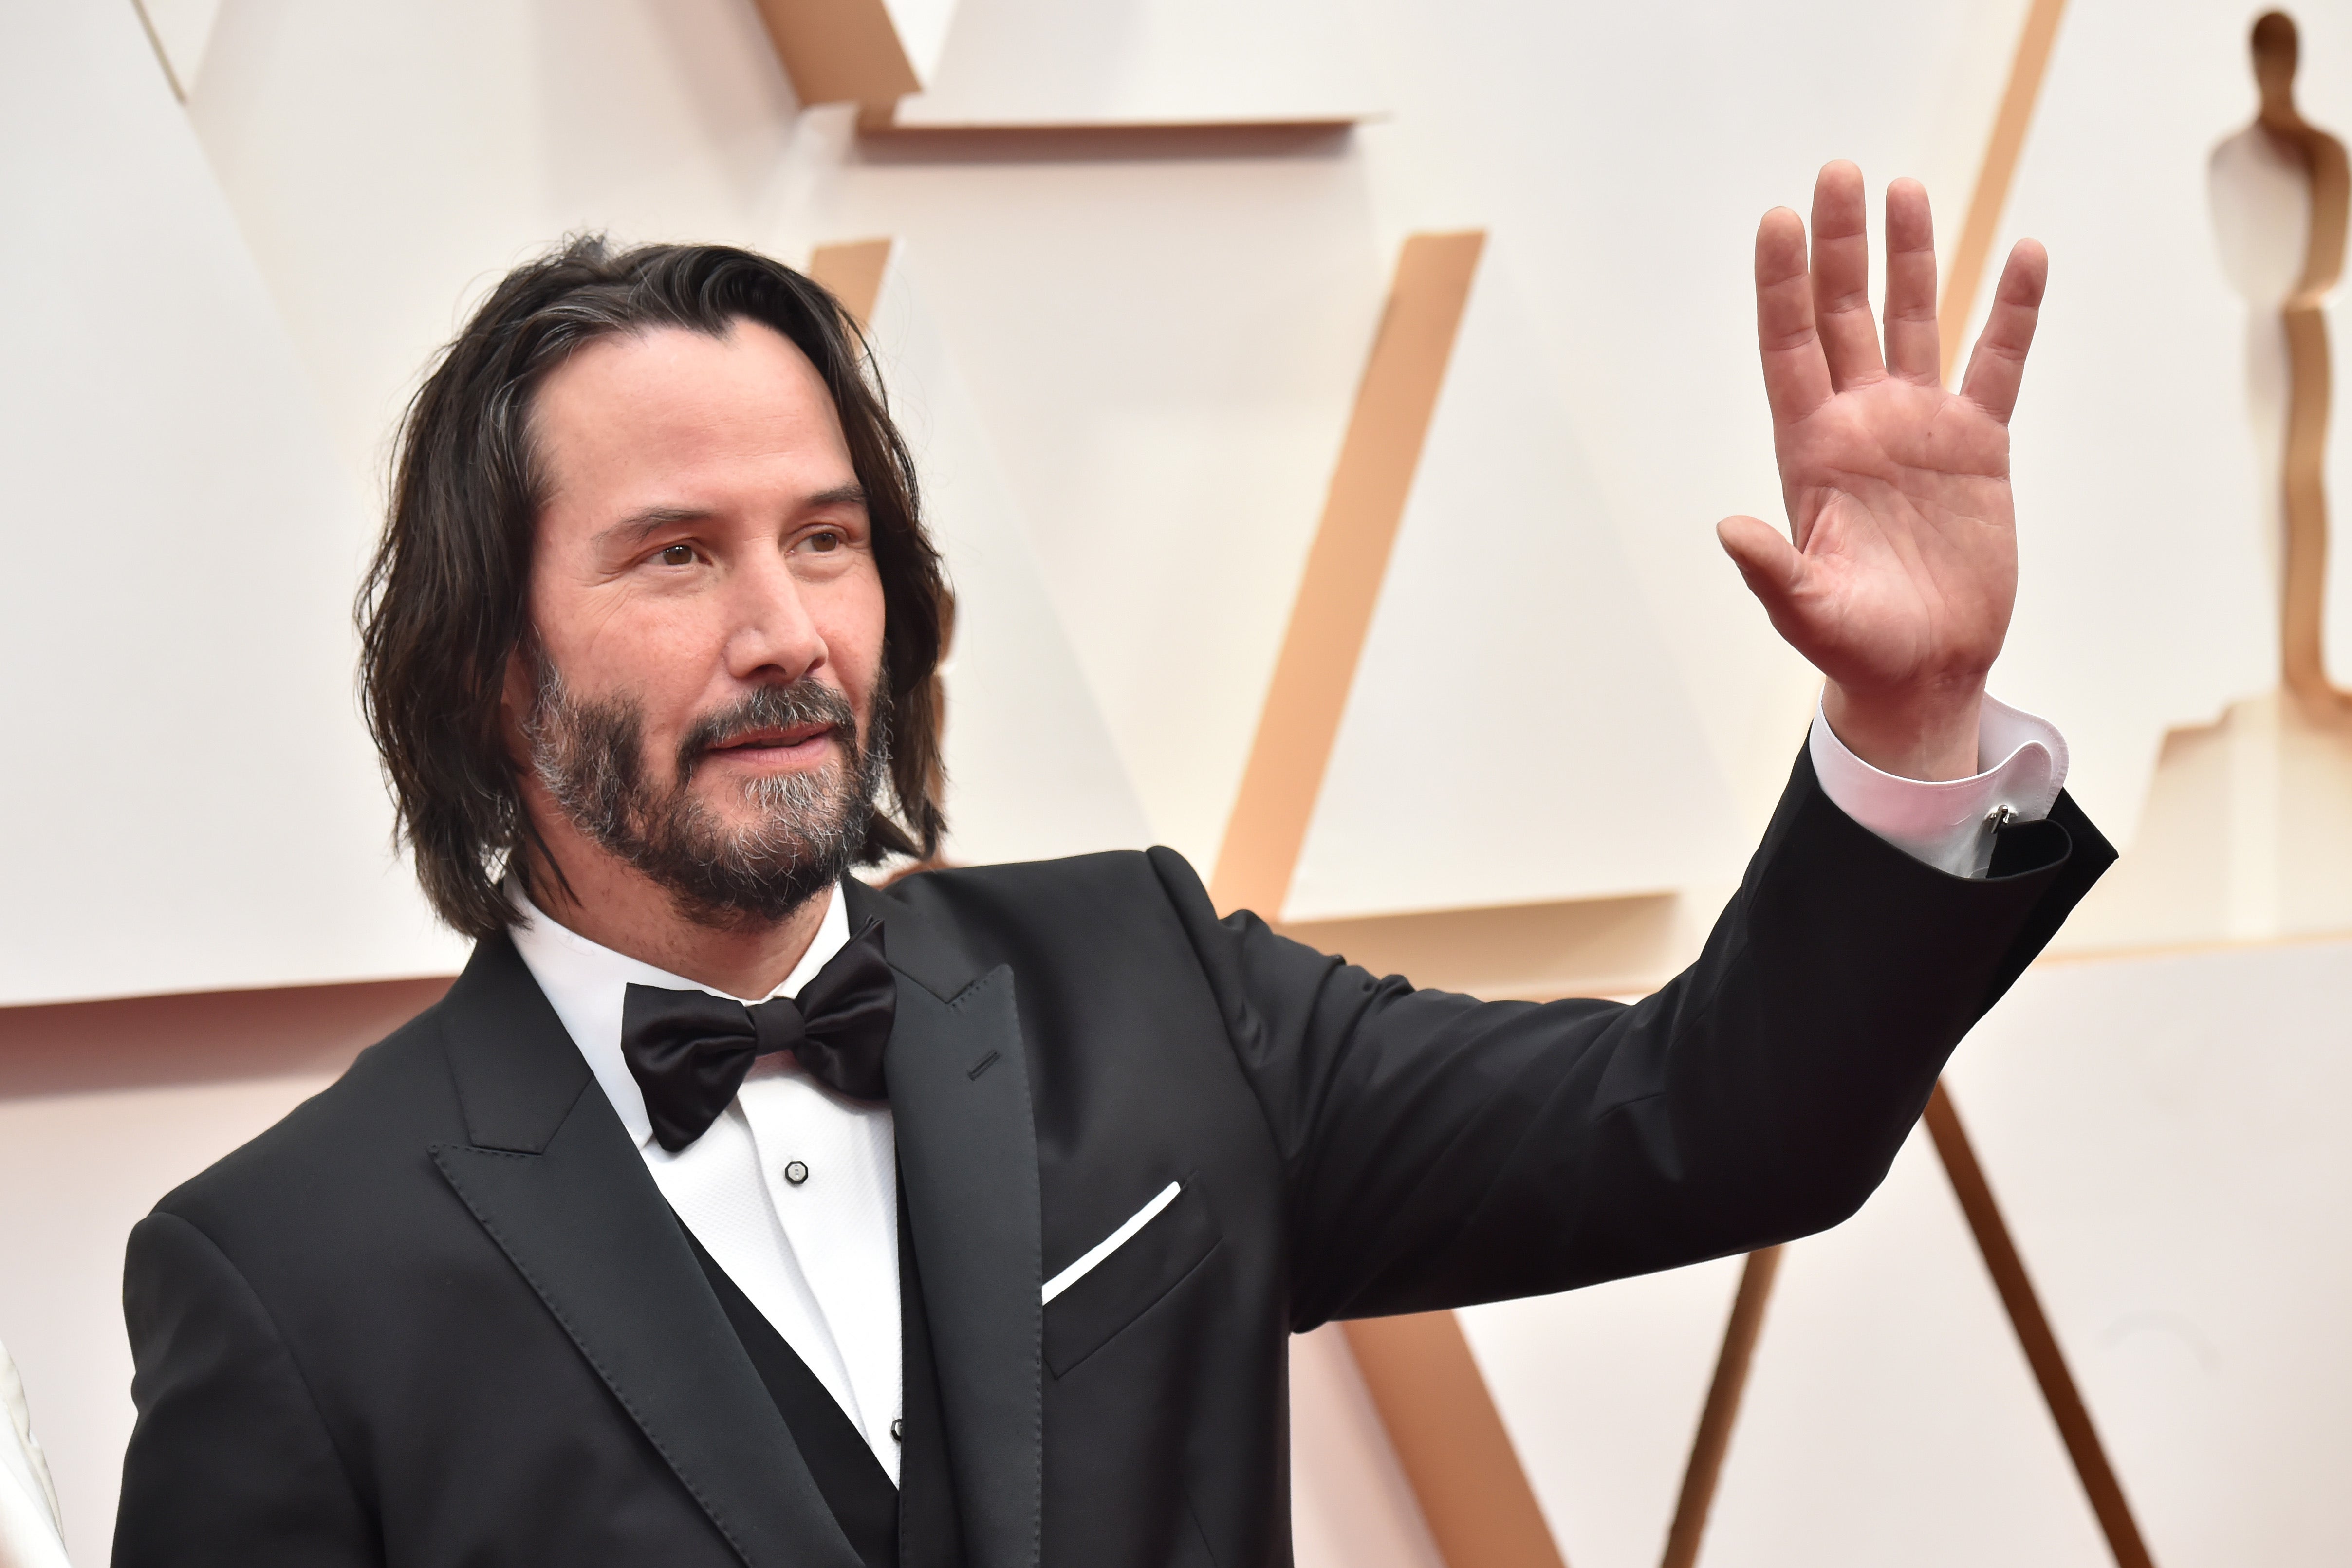 Keanu Reeves melts hearts in clip with 9yearold fan ‘Oh my gosh